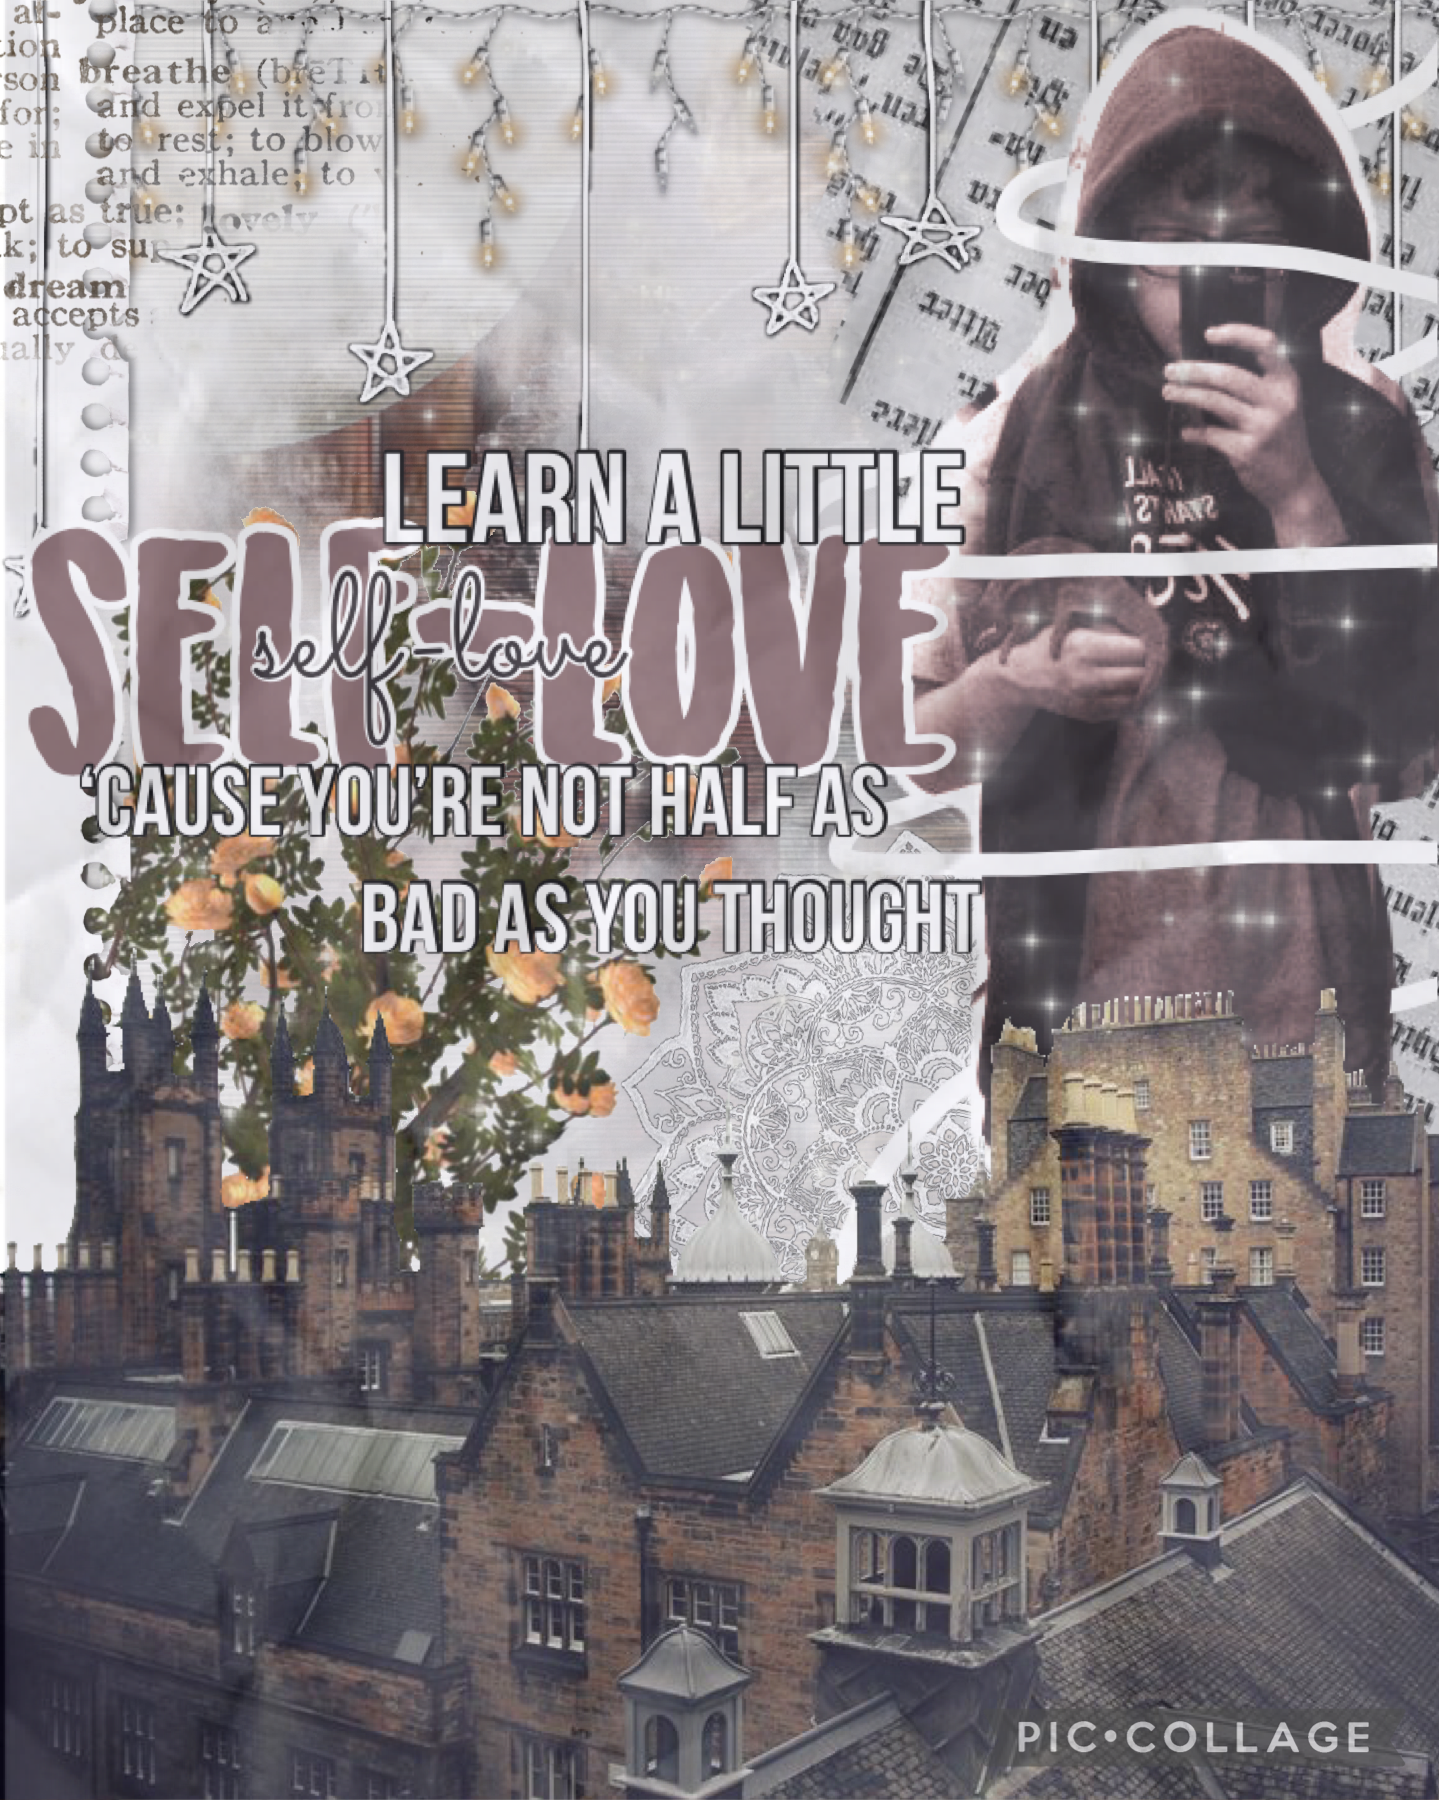 🖤 TAP 🖤
🖤 Dark Acadamia aesthetic! 🖤
🖤 For @sequoia’s competition!! 🖤
🖤 cavetown collage!! 🌟 🖤
🖤 im not 100% back? Im just making collages for competitions rn and i might post more on the weekends :) 🖤
🖤 ilysm!! 🖤